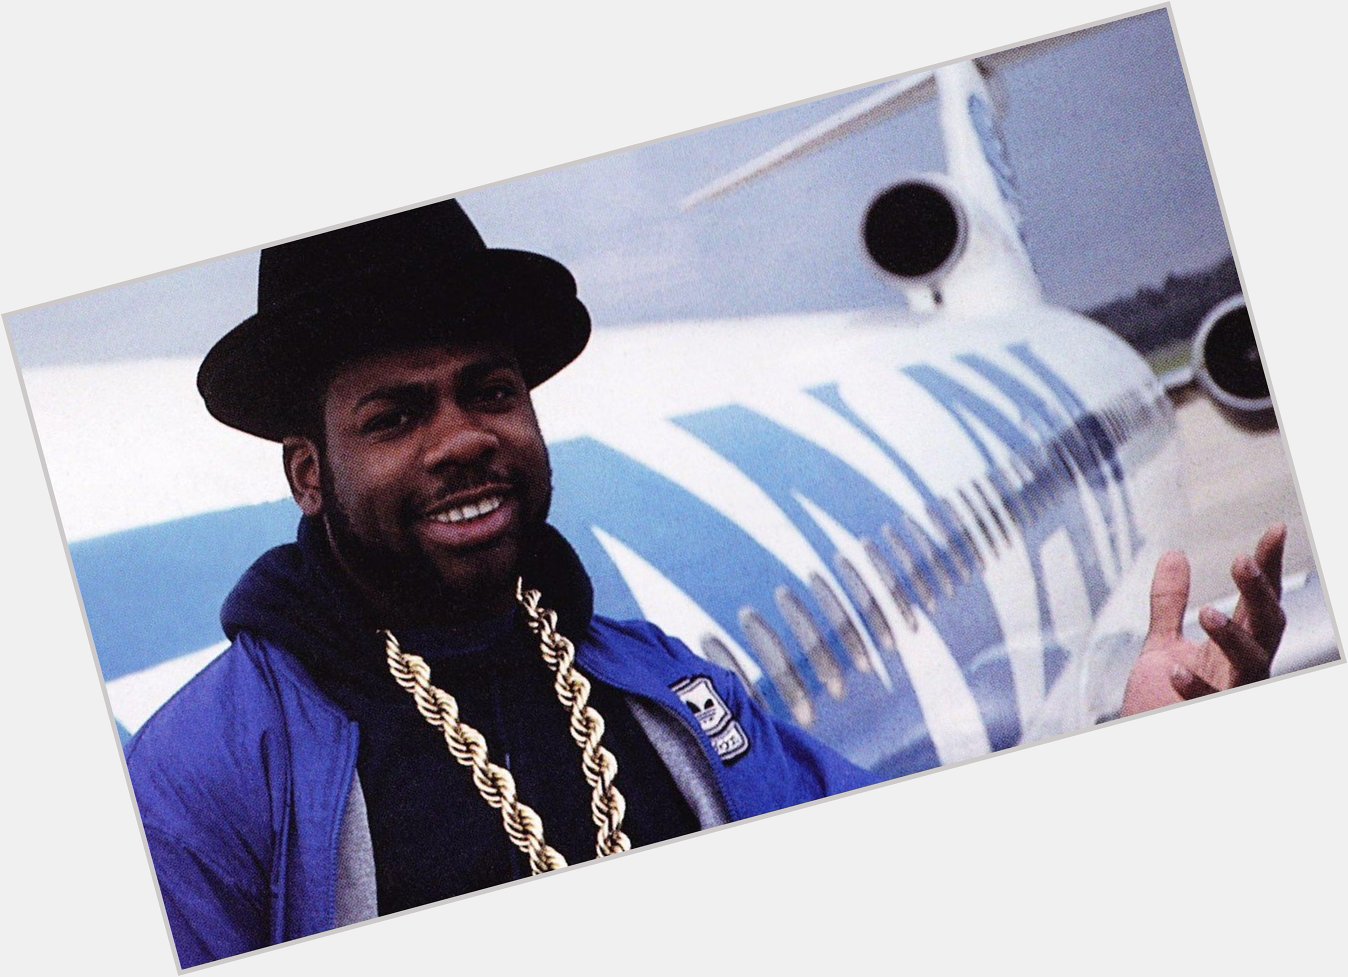 Happy Birthday to Jam Master Jay, who would have turned 50 today! 